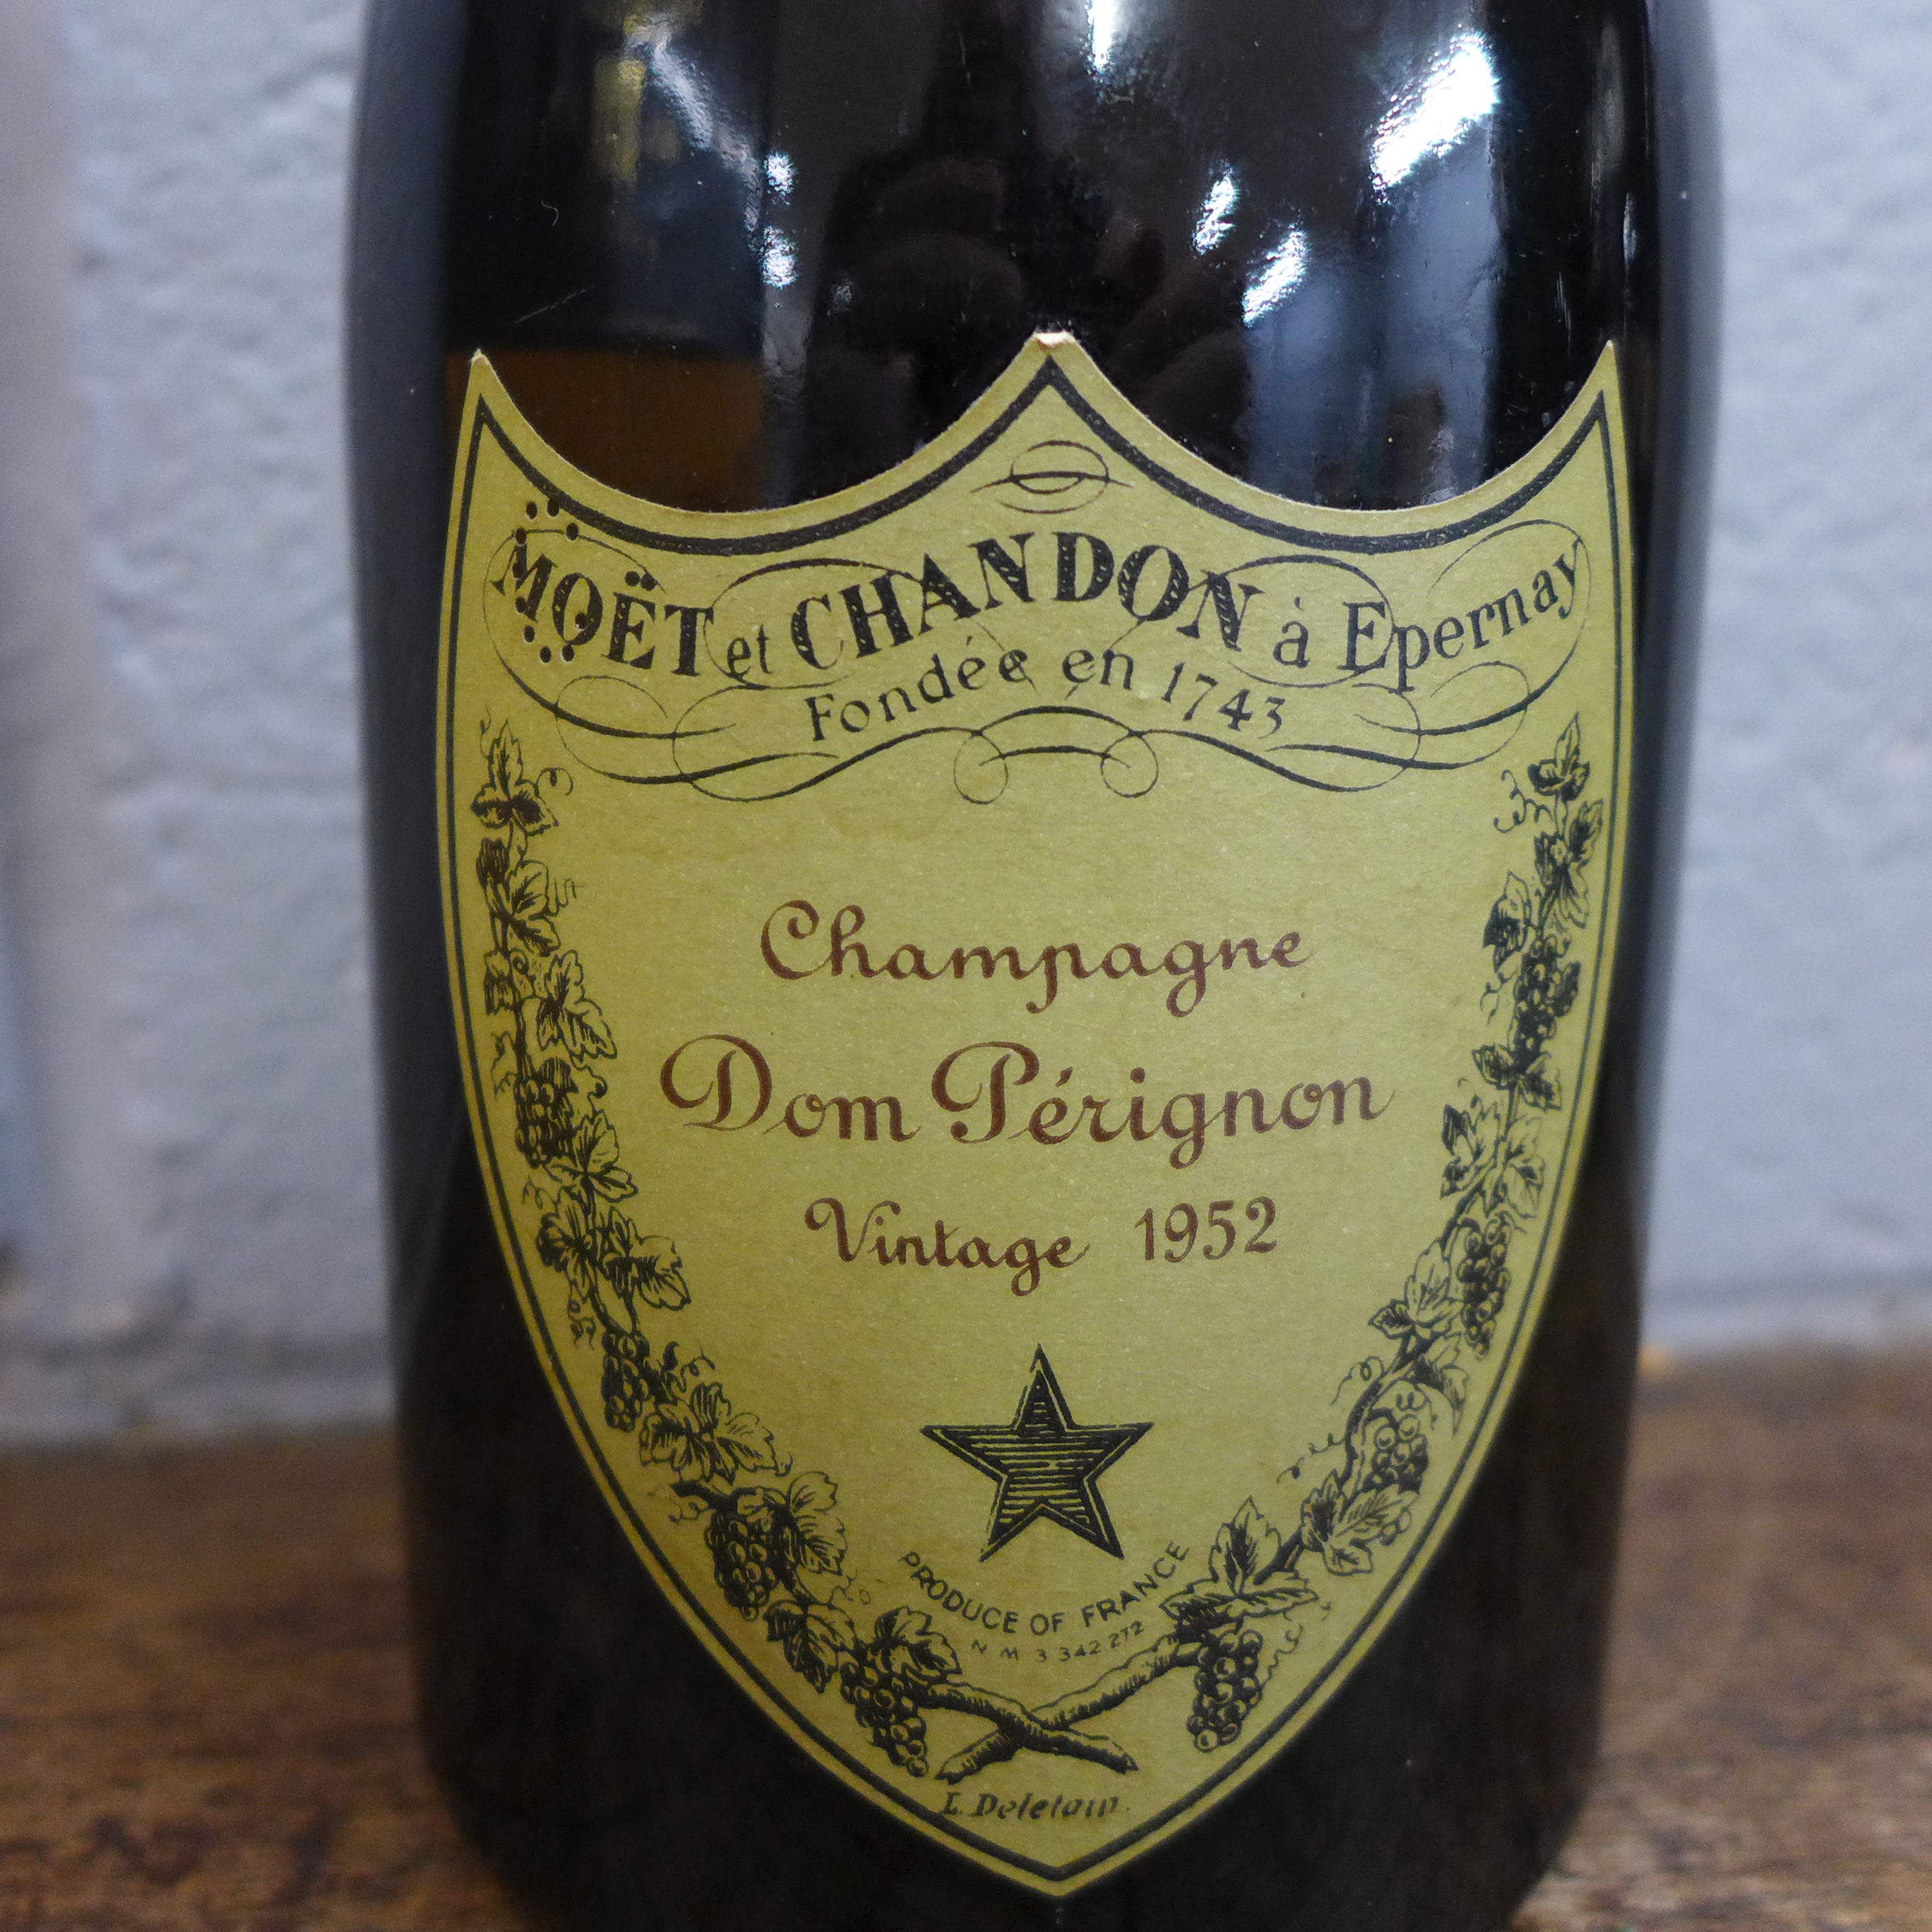 A bottle of Moet and Chandon Dom Perignon Champagne, 1952 vintage - Image 2 of 2